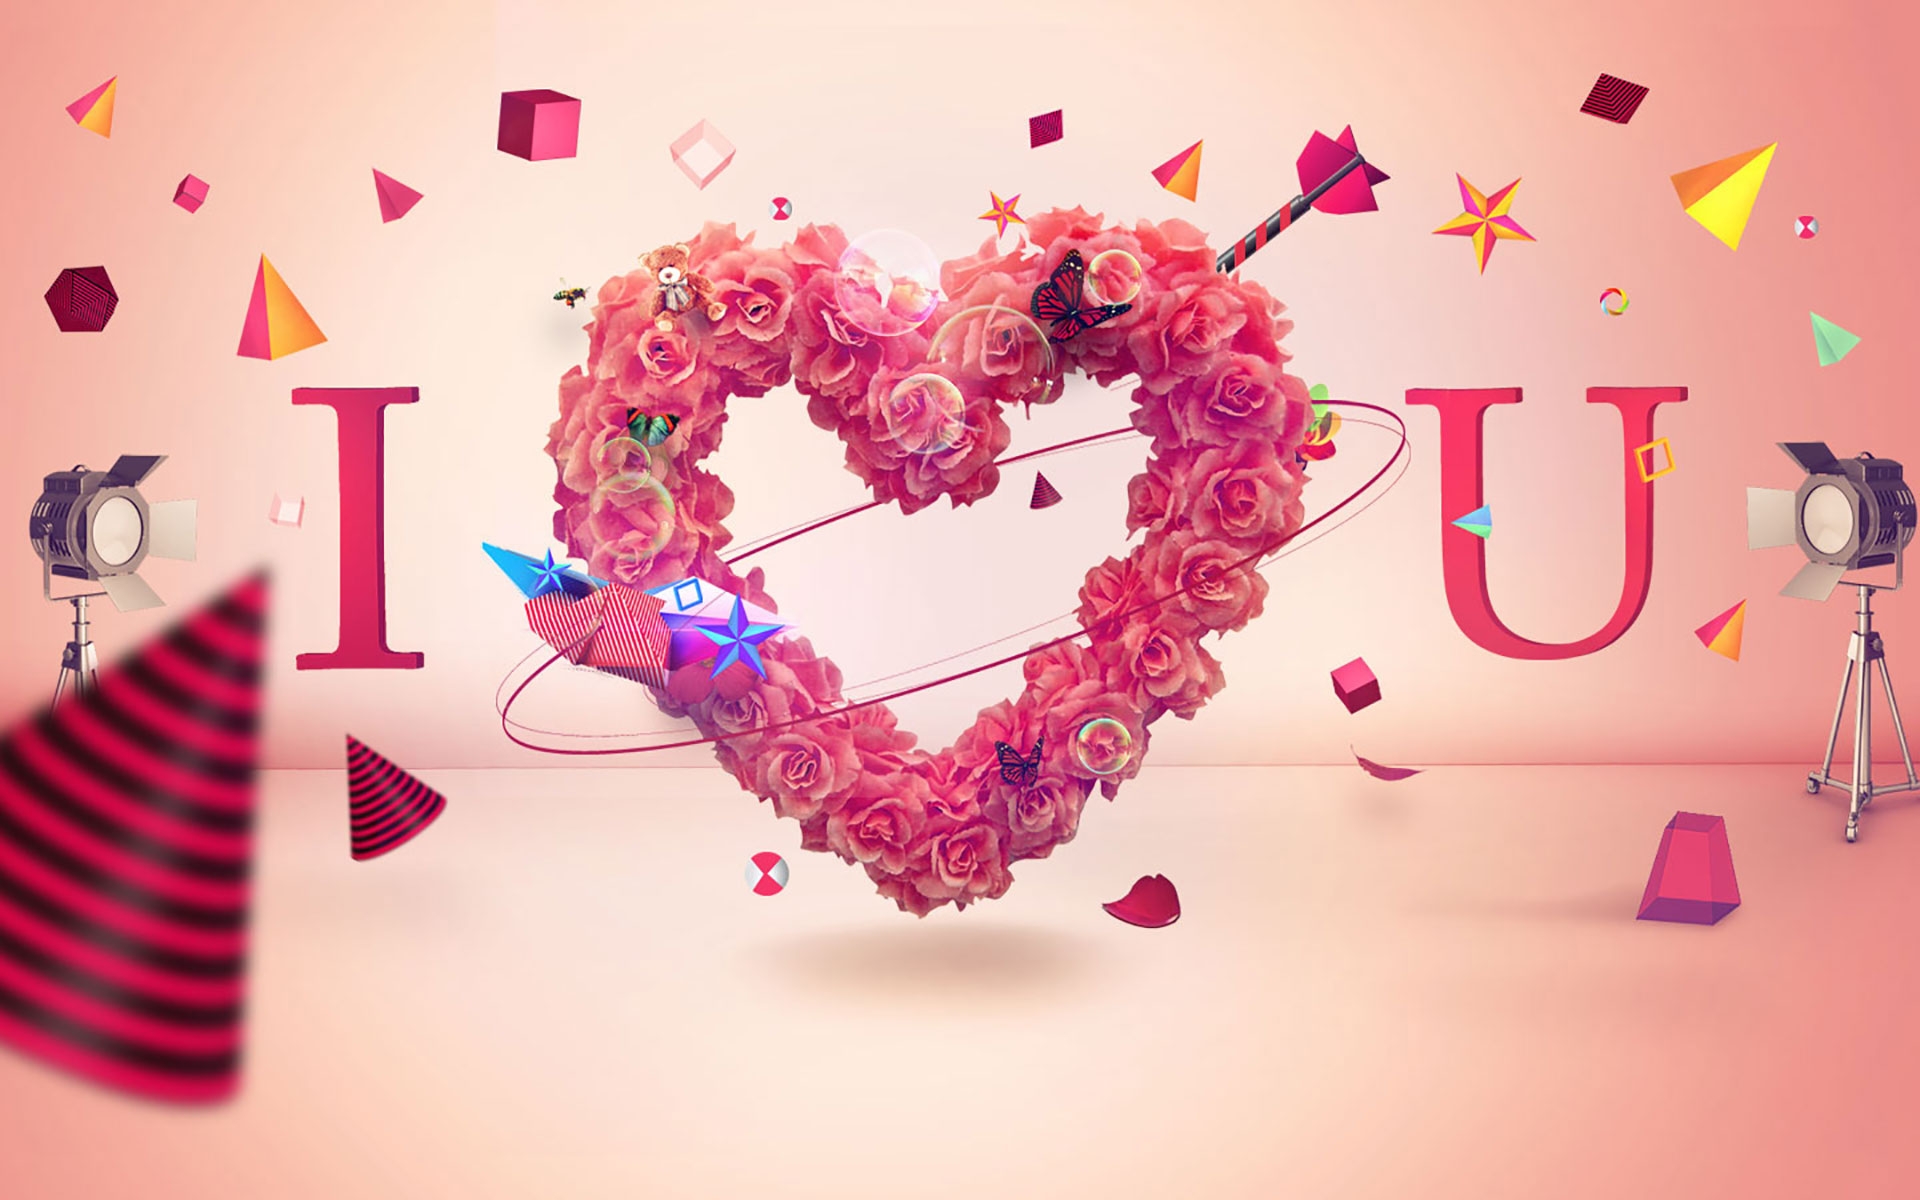 Of I Love You Angel Hd Download Of I Love You Angel - Love Pic Download Hd - HD Wallpaper 